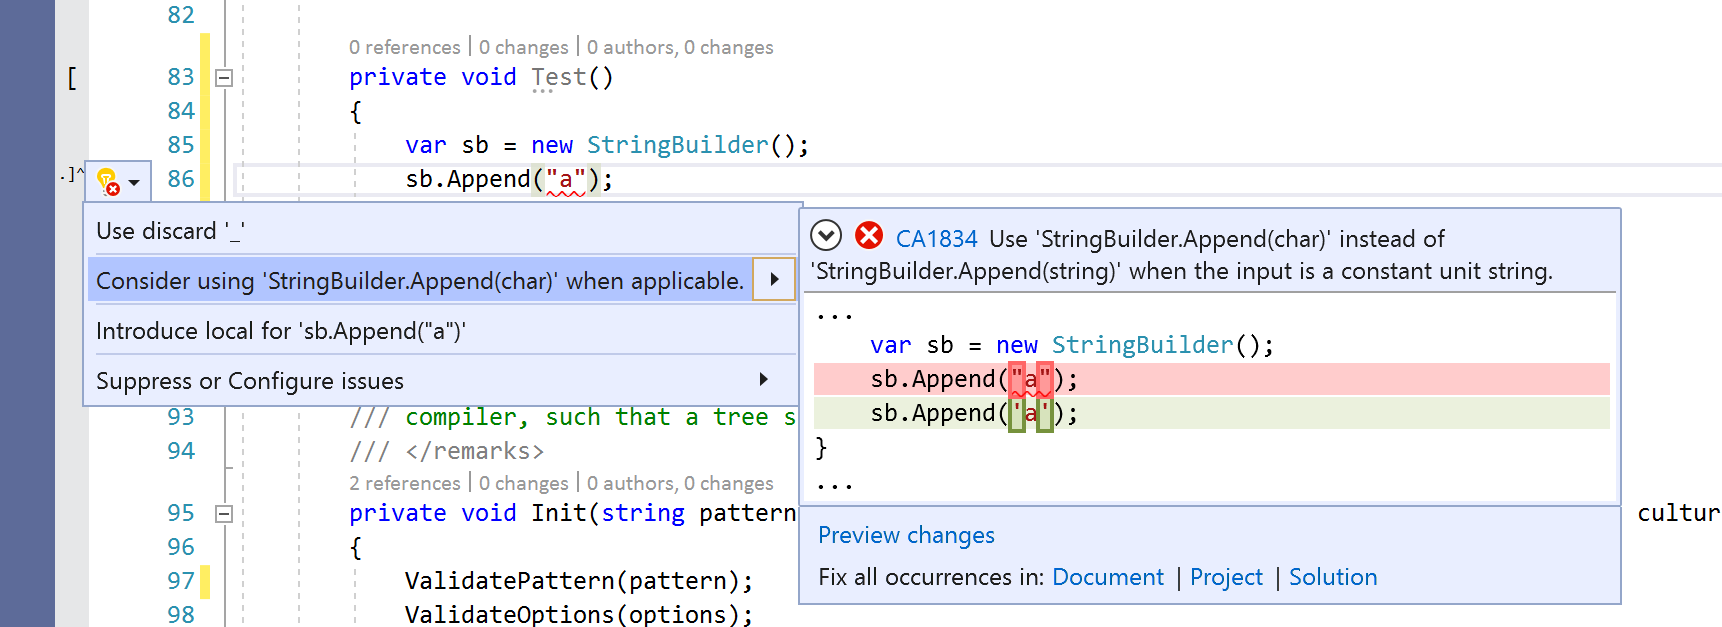 Code fix for CA1834 - Use StringBuilder.Append(char) for single character strings